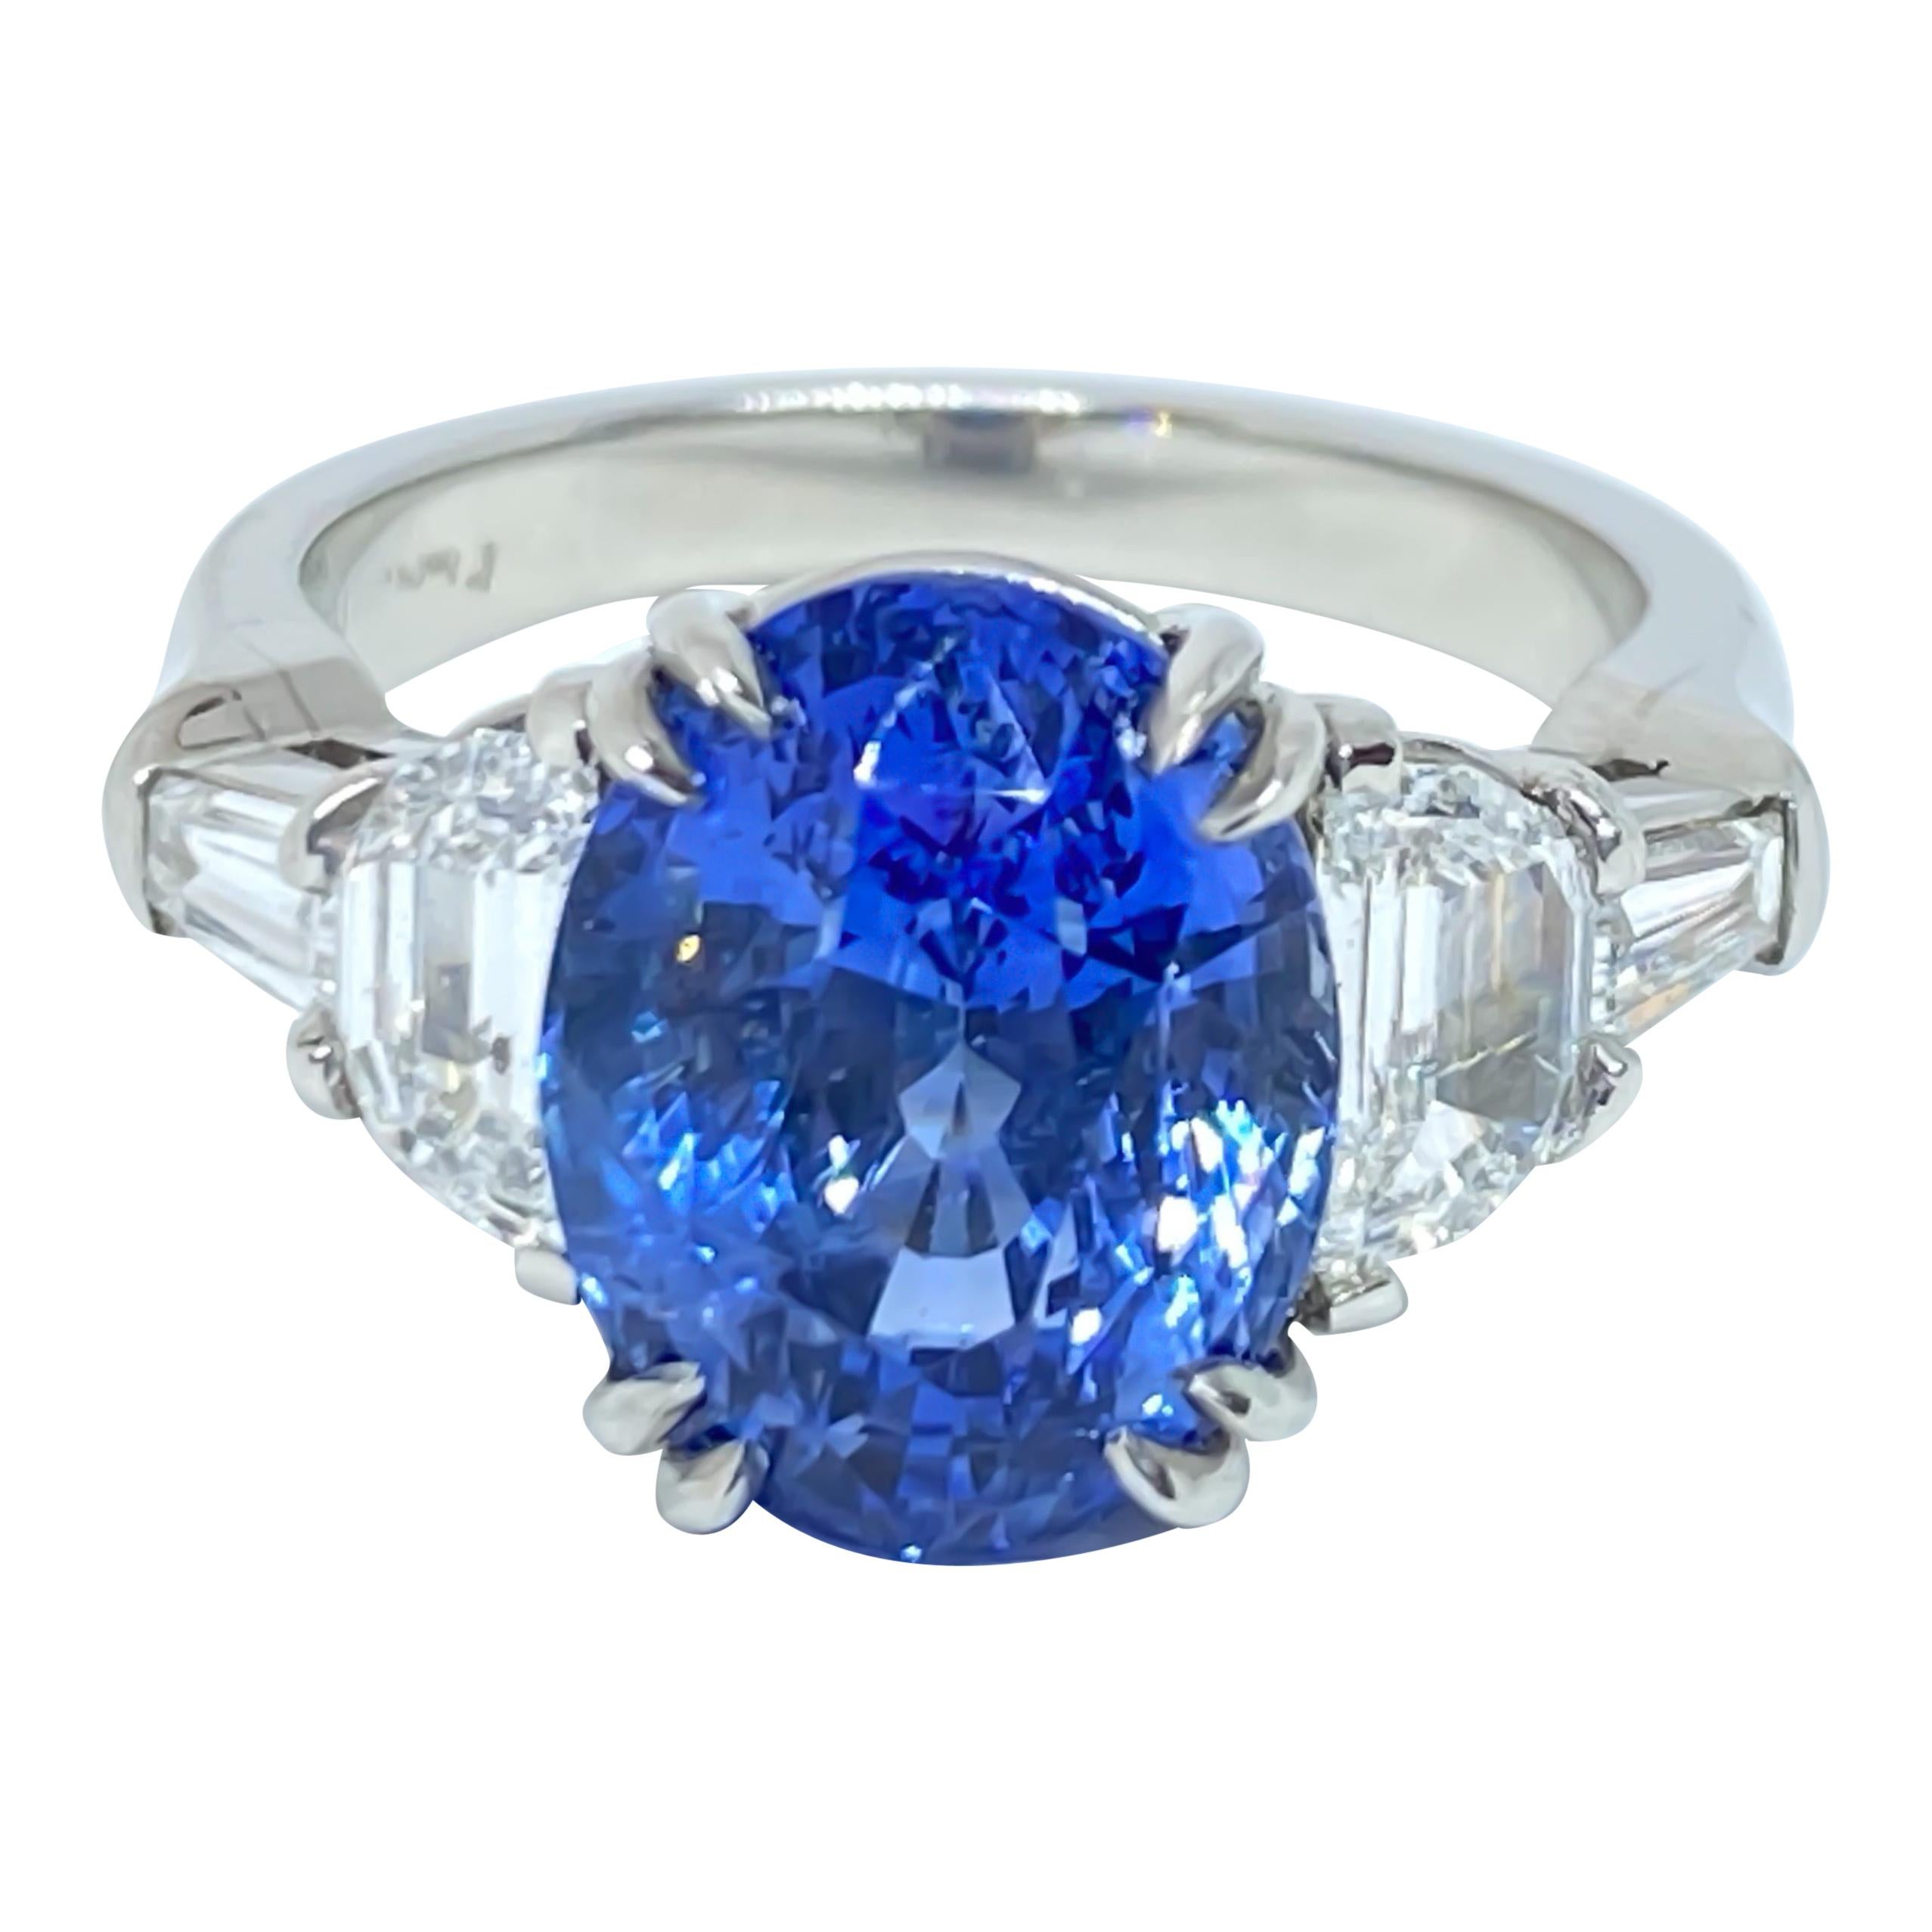 Natural Oval Blue Sapphire & Diamond Ring in Handmade Platinum Mounting 7.11 CT